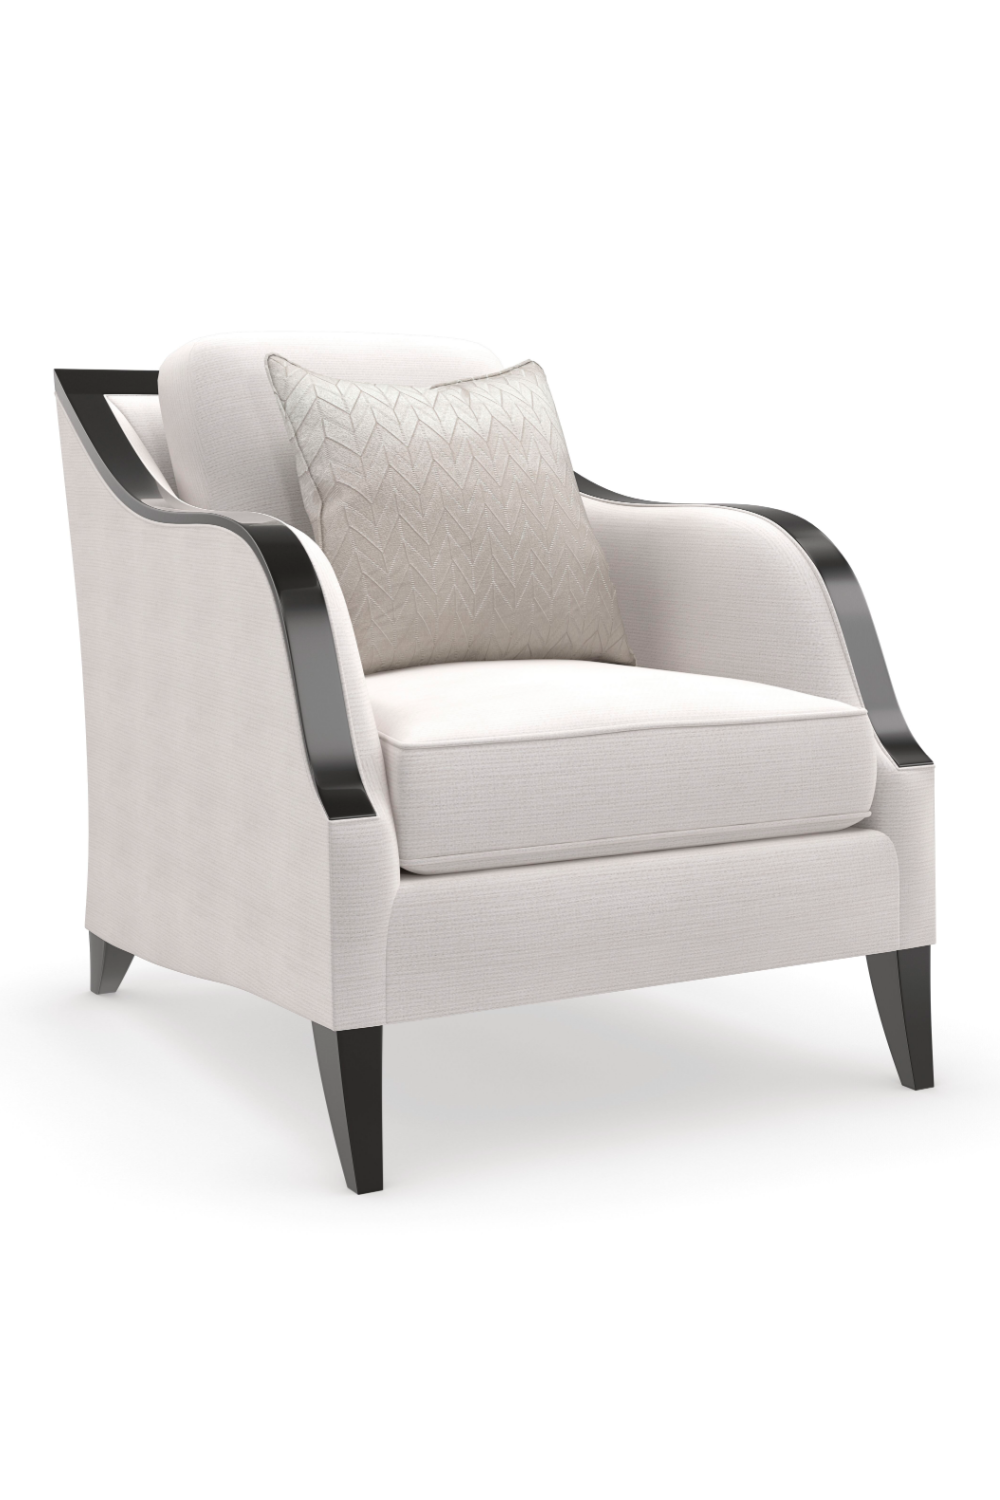 Track Arm Lounge Chair | Caracole Pitch Perfect | Oroa.com